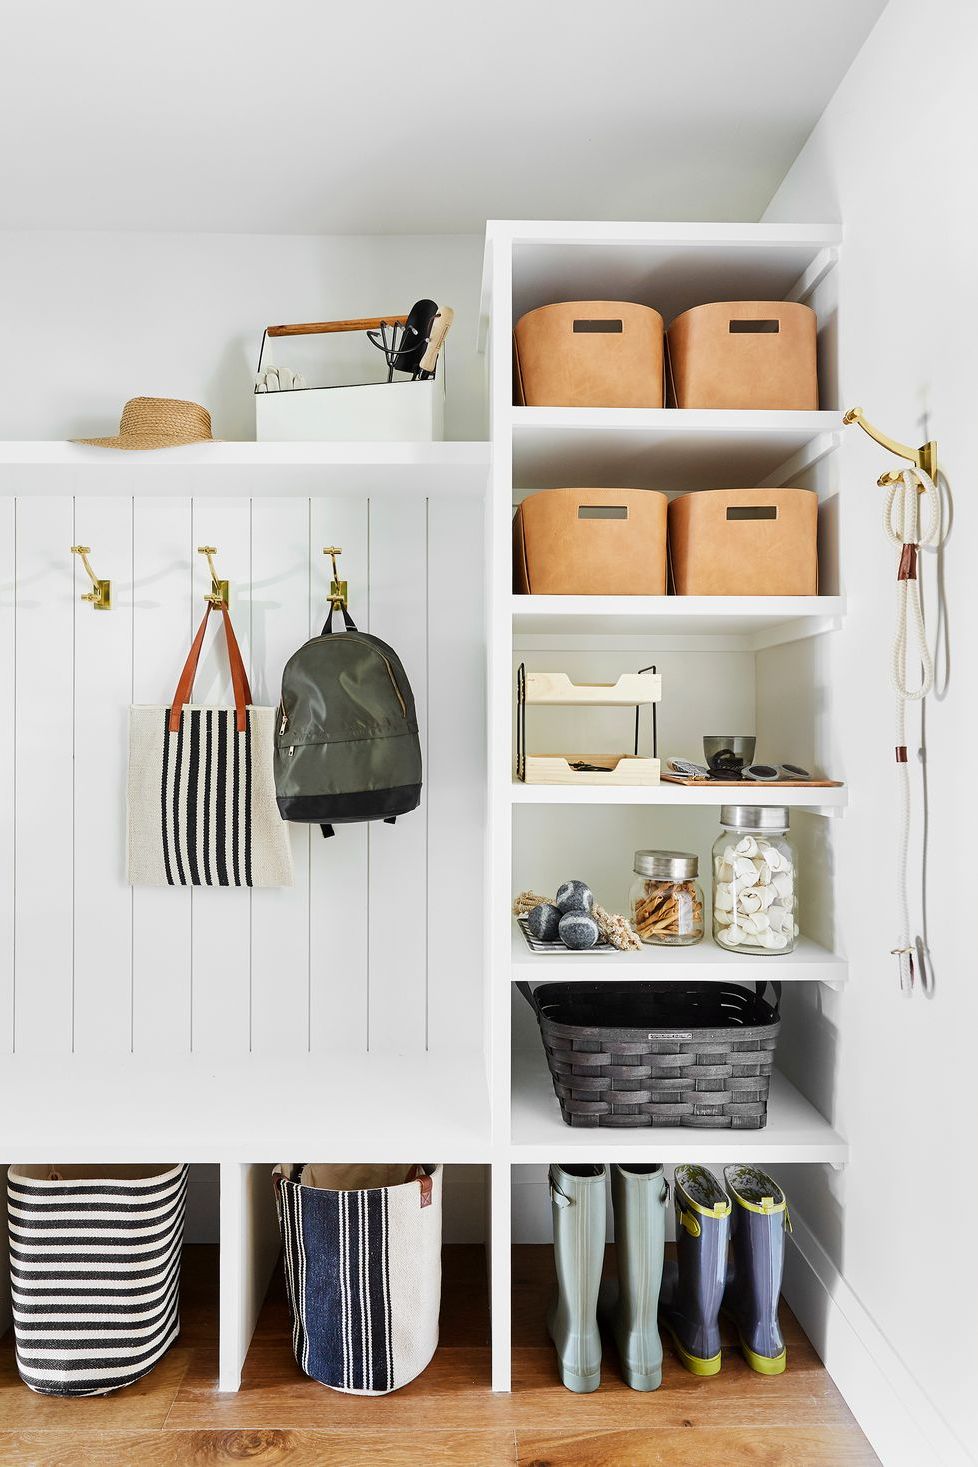 15 Home Organization Ideas for Every Room